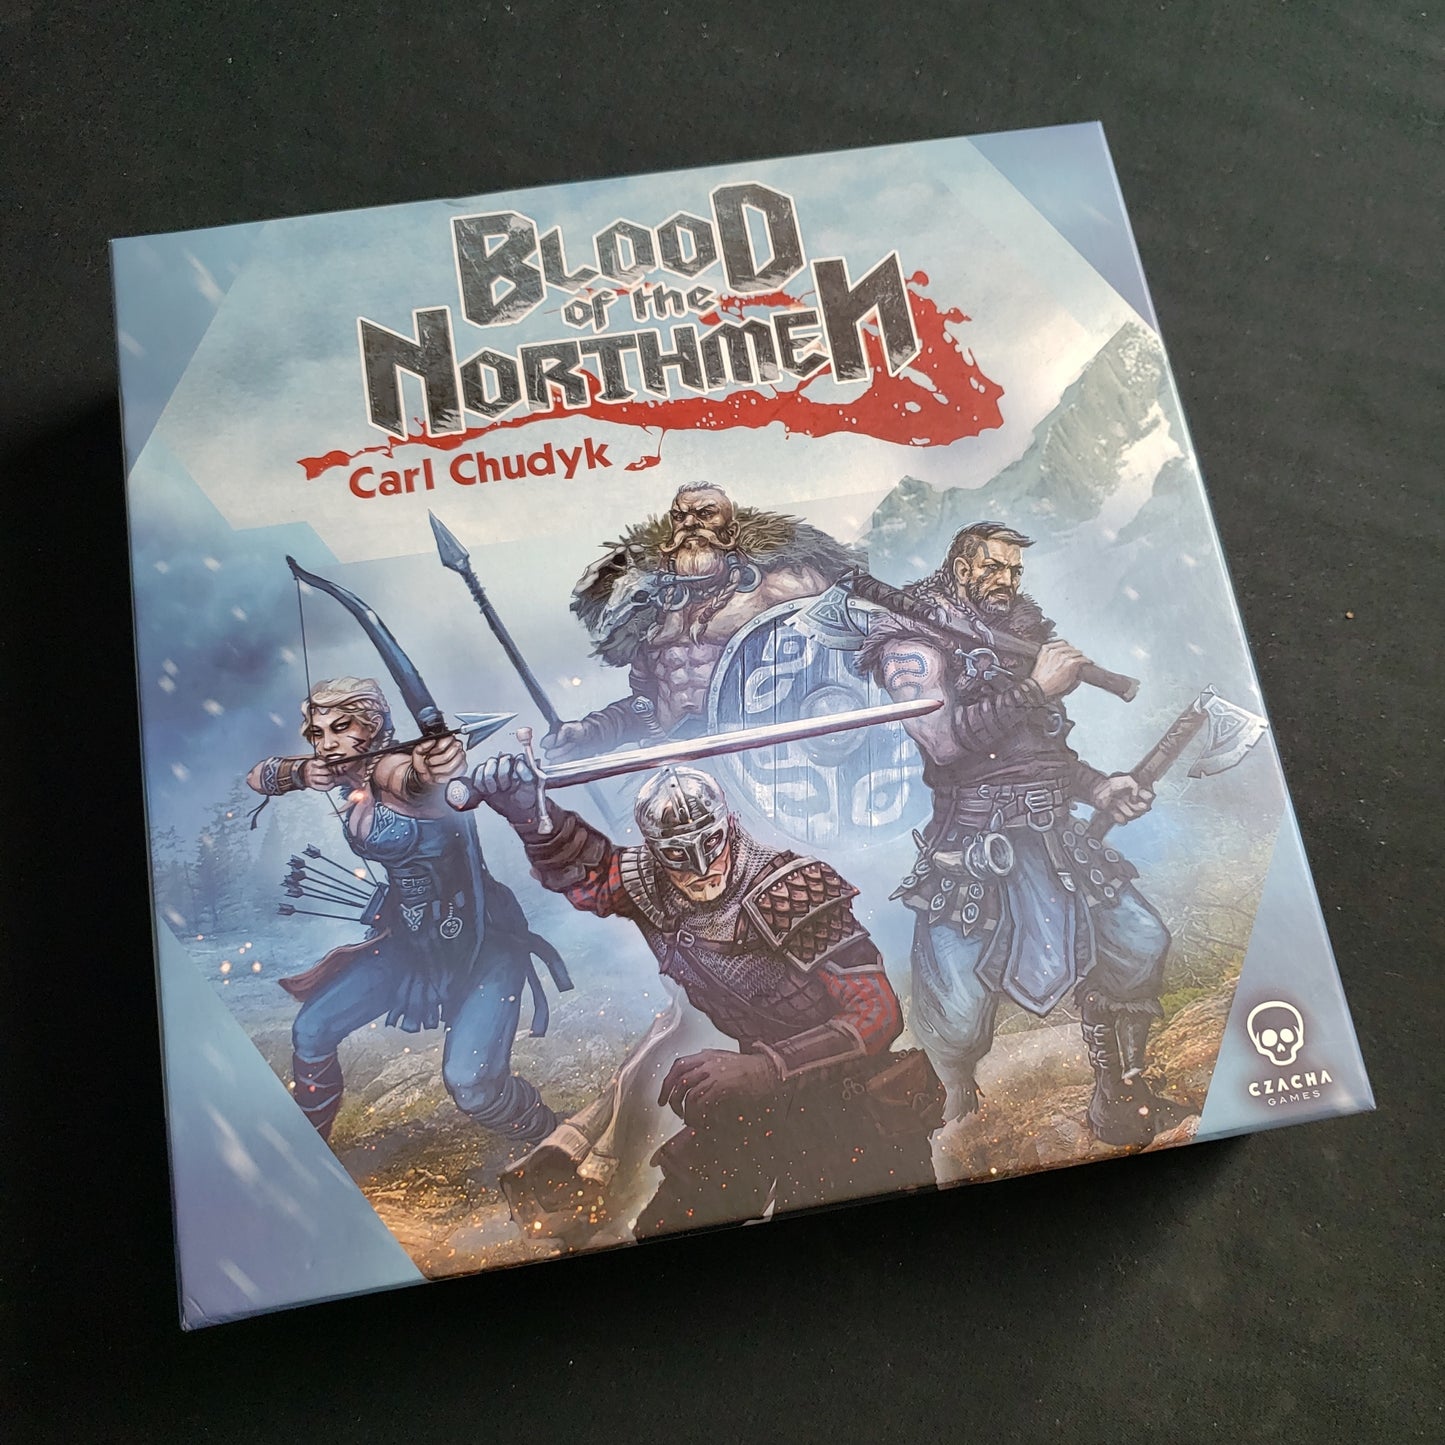 Image shows the front cover of the box of the Blood of the Northmen board game